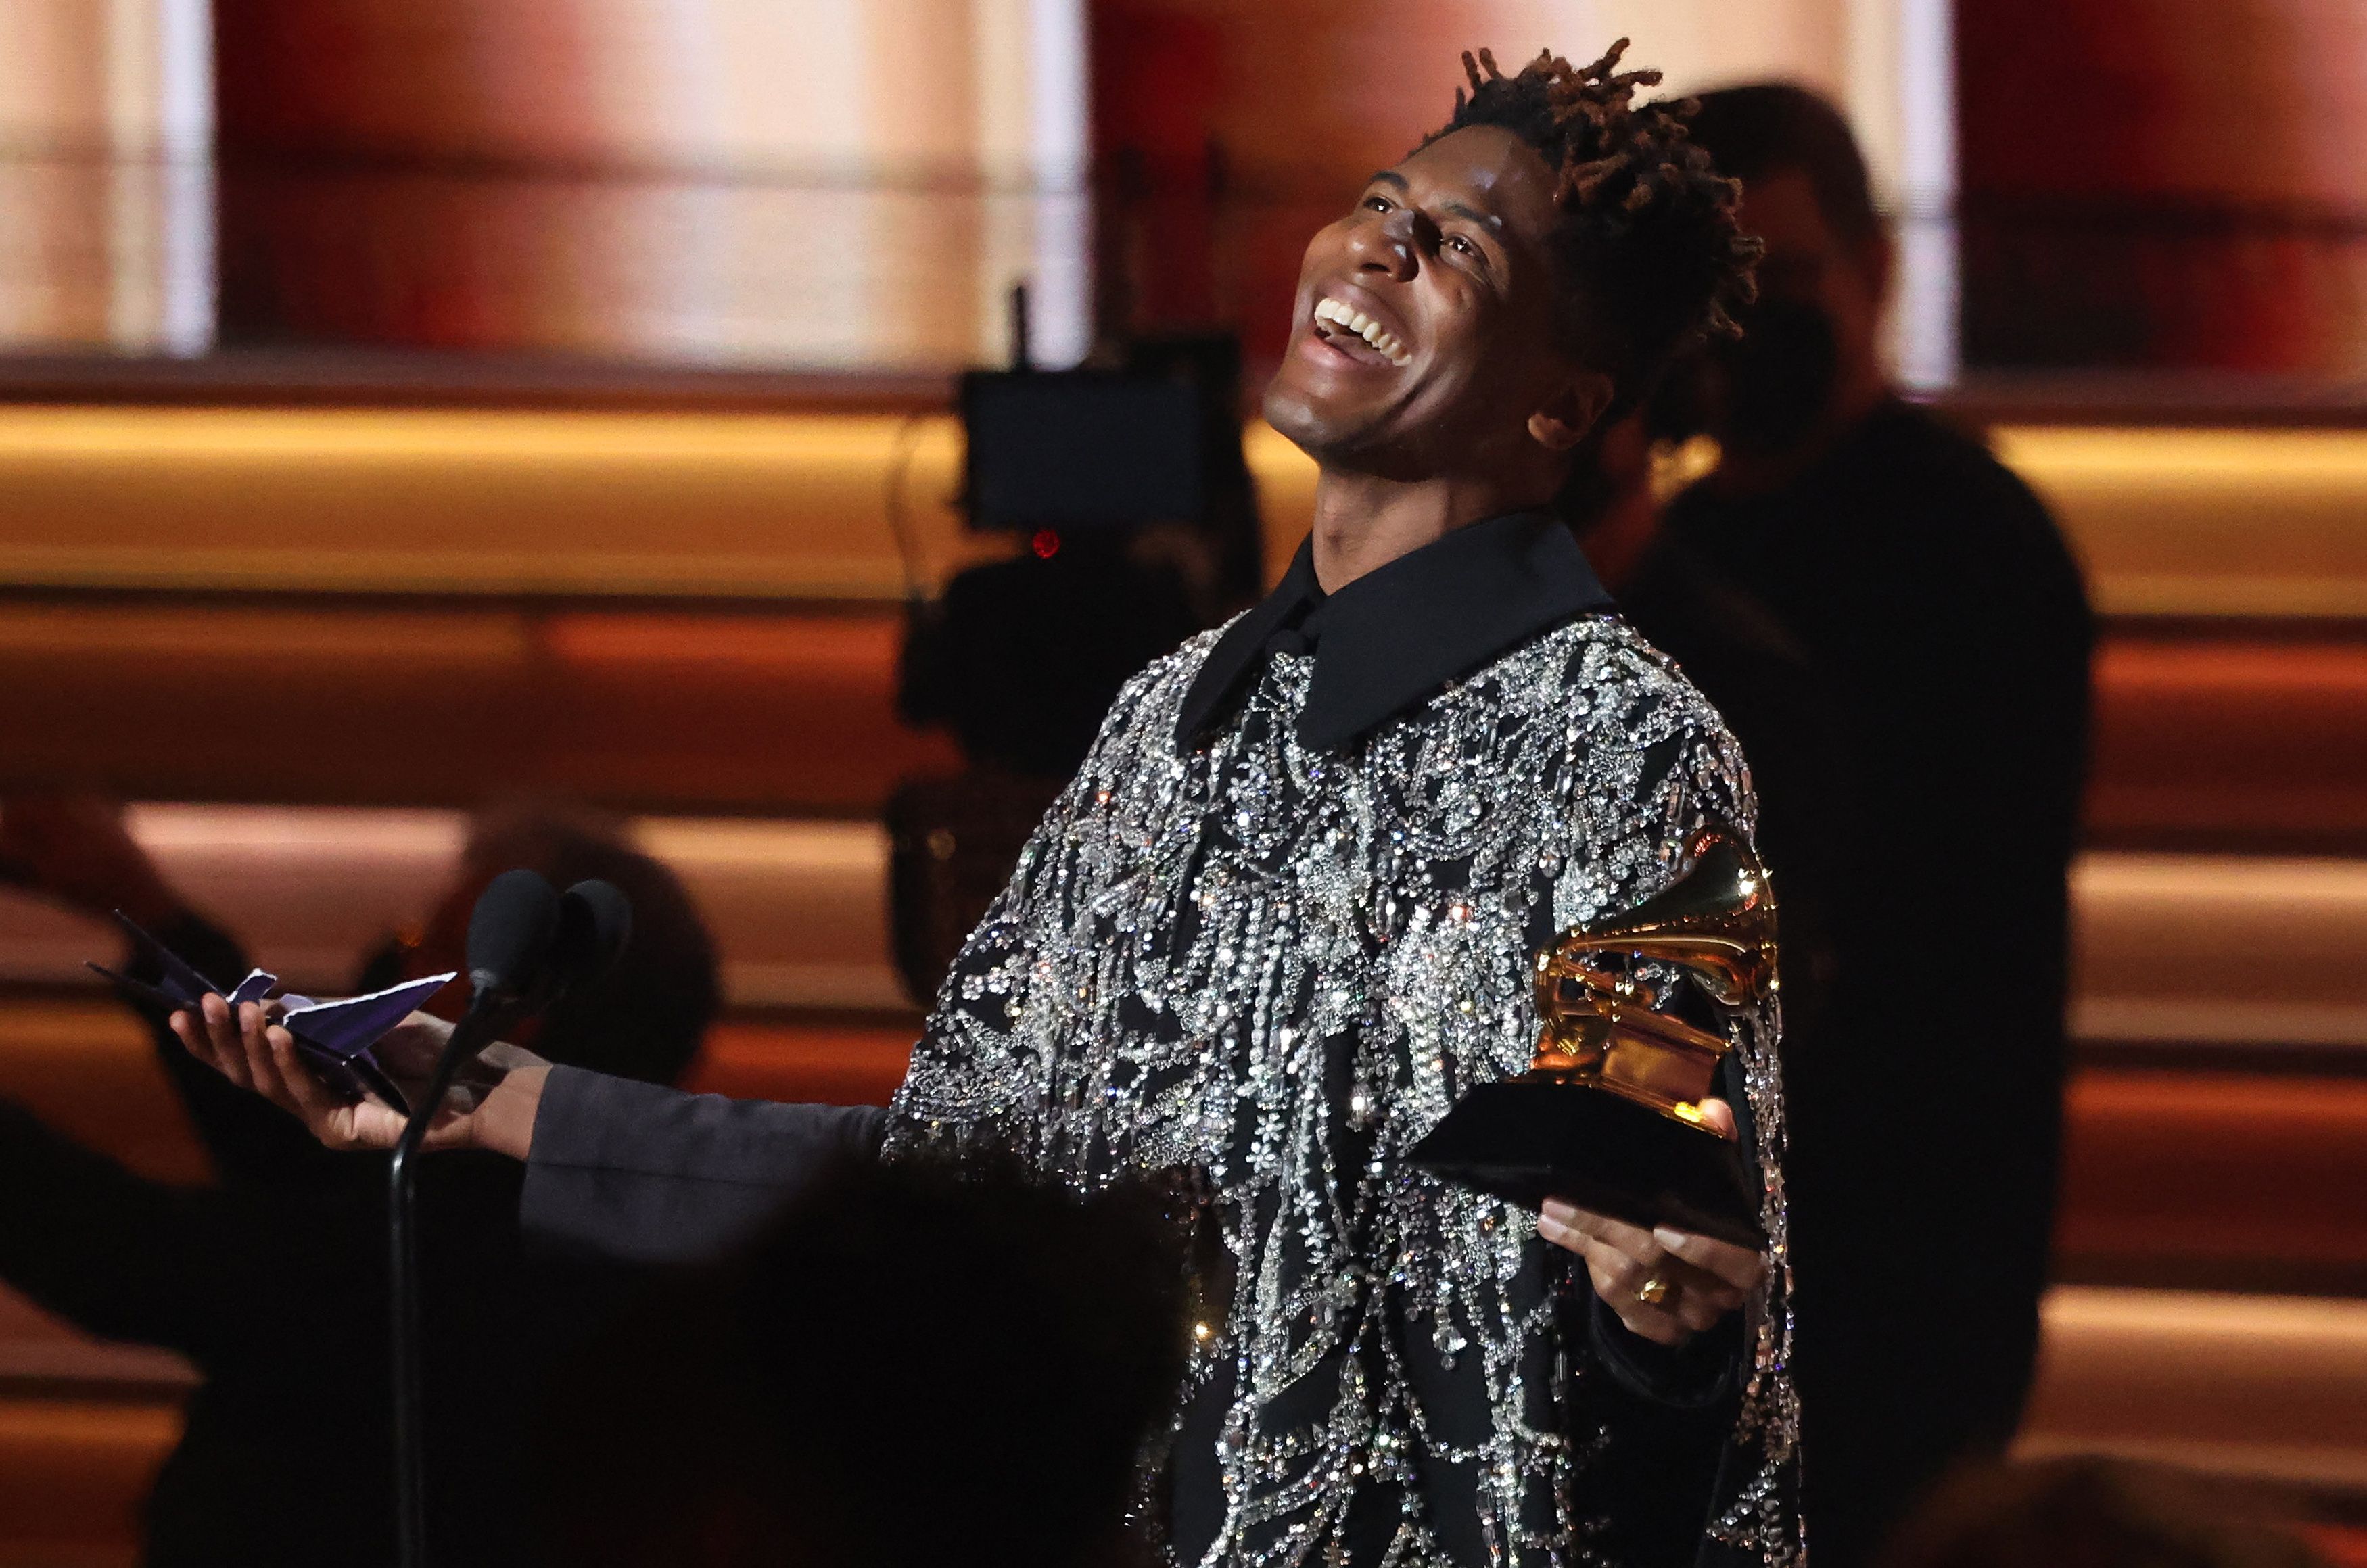 Jon Batiste accepts the Grammy award for Album of the Year for "We Are" during the 64th Annual Grammy Awards show in Las Vegas, Nevada, U.S. April 3, 2022.    REUTERS/Mario Anzuoni